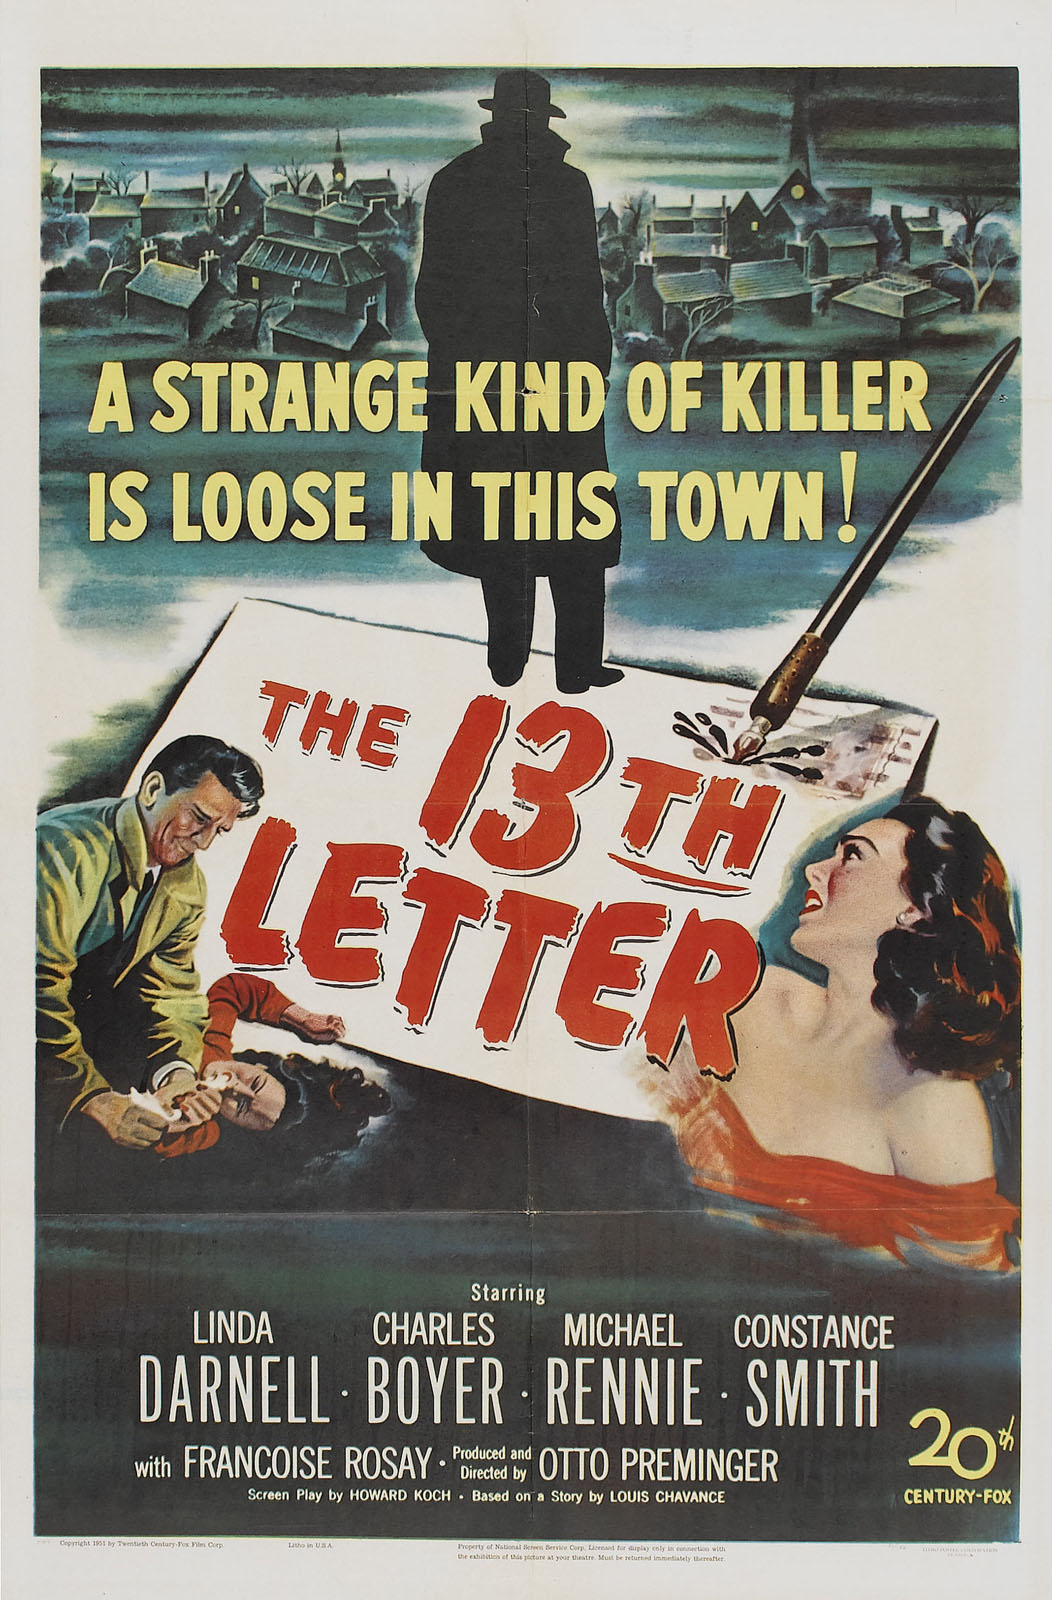 13TH LETTER, THE